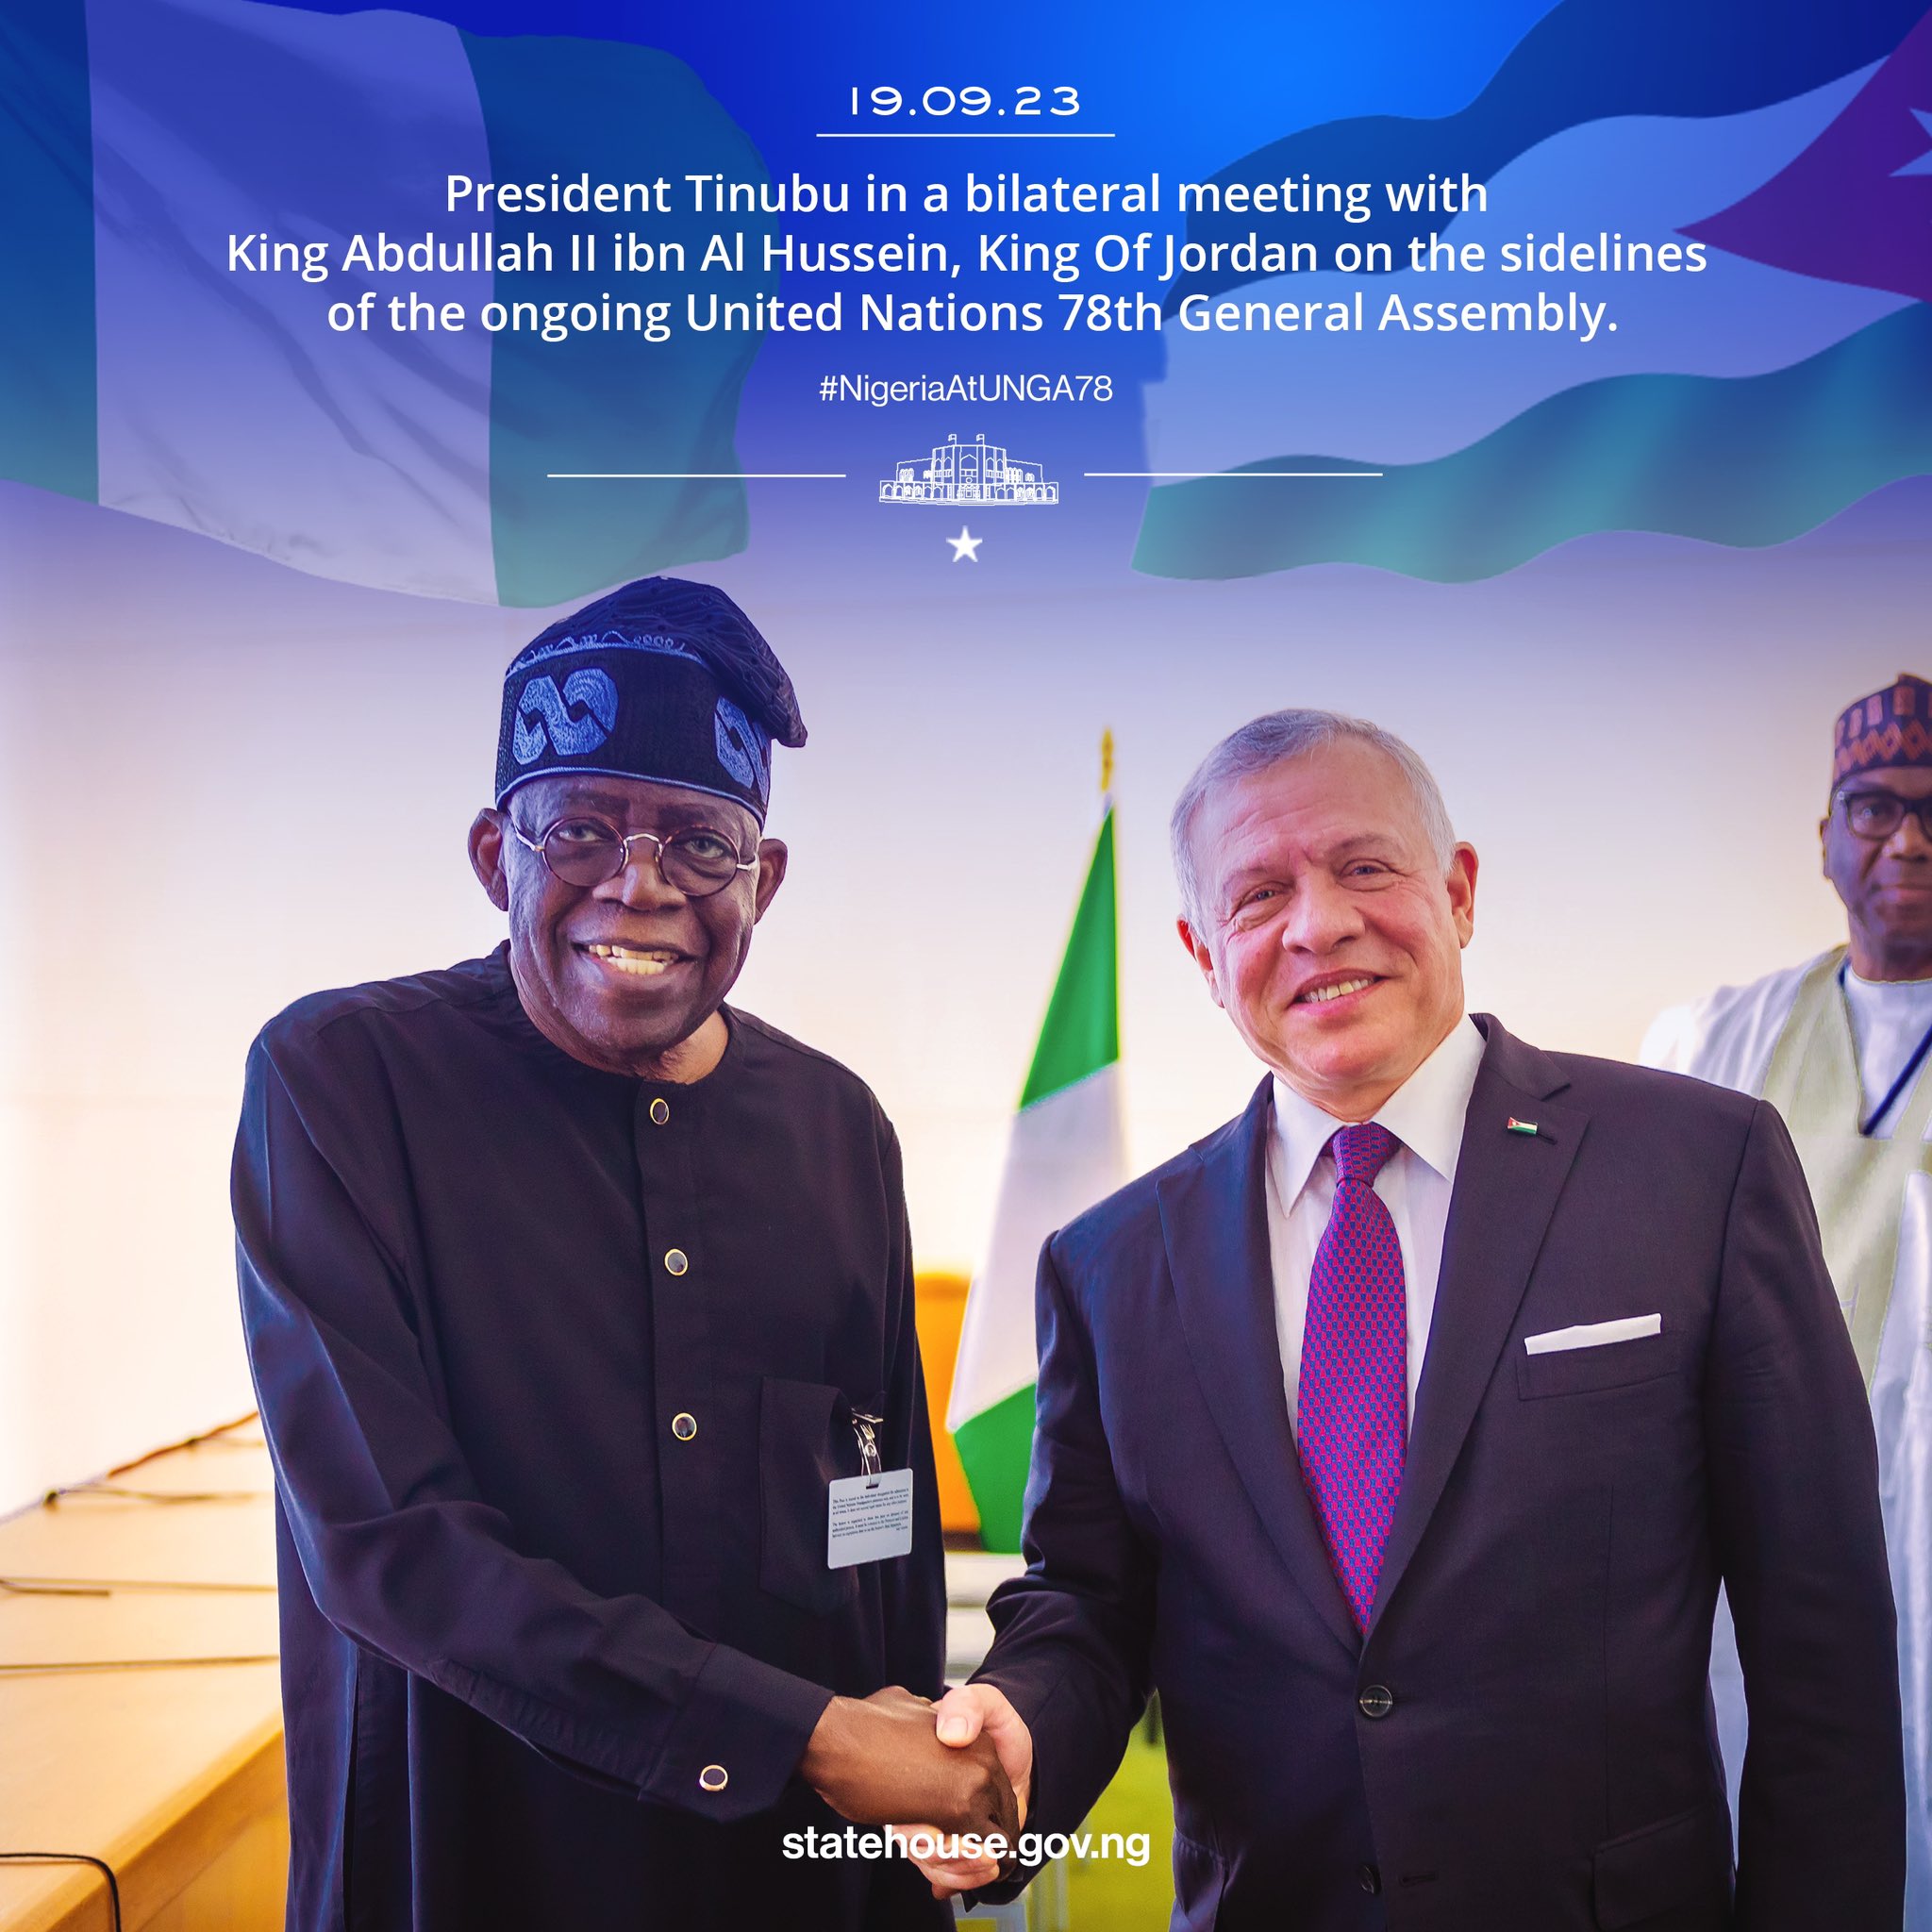 Photo News: President Bola Tinubu @officialABAT in a bilateral meeting with King Abdullah II ibn Al Hussein, King Of Jordan on the sidelines of the ongoing United Nations 78th General Assembly. #PBATatUNGA78 #NigeriaAtUNGA78 #UNGA78